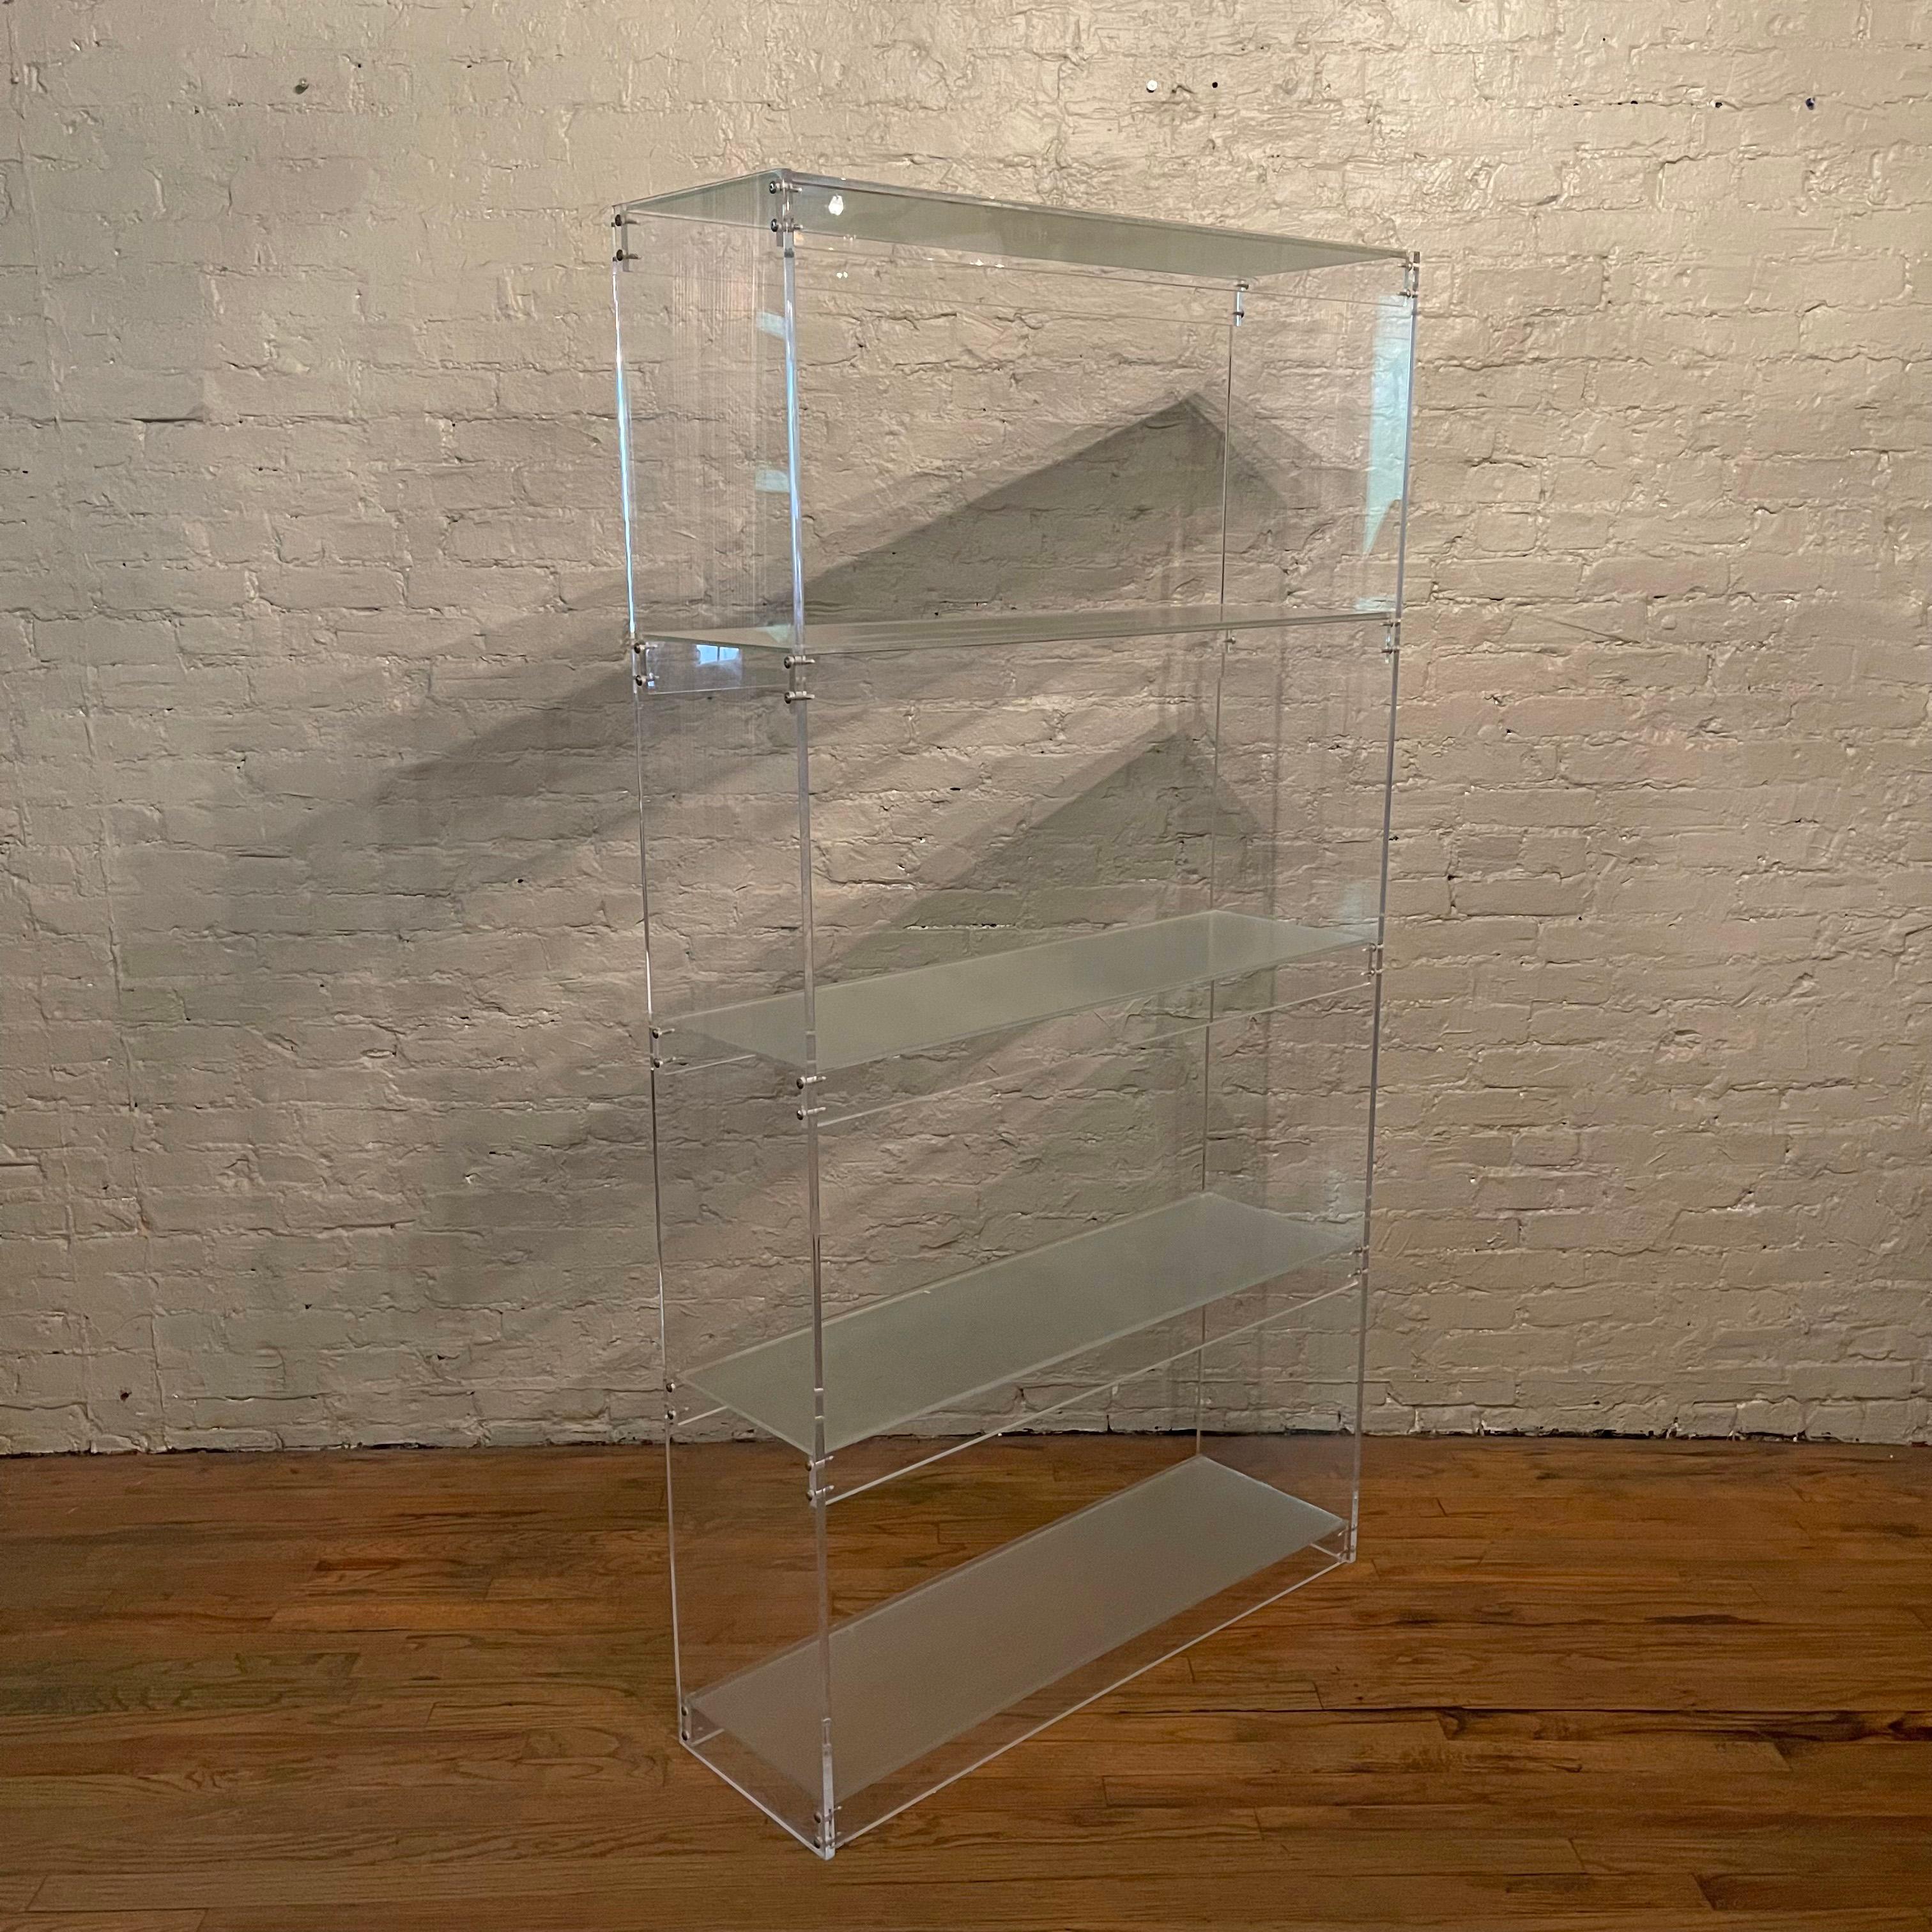 Clear Lucite, etagere, open shelving unit with architectural glass shelves features four sections divided evenly at 16 inches height. There is a complimentary contrast between the clear Lucite frame and textured glass that elevates this piece. This